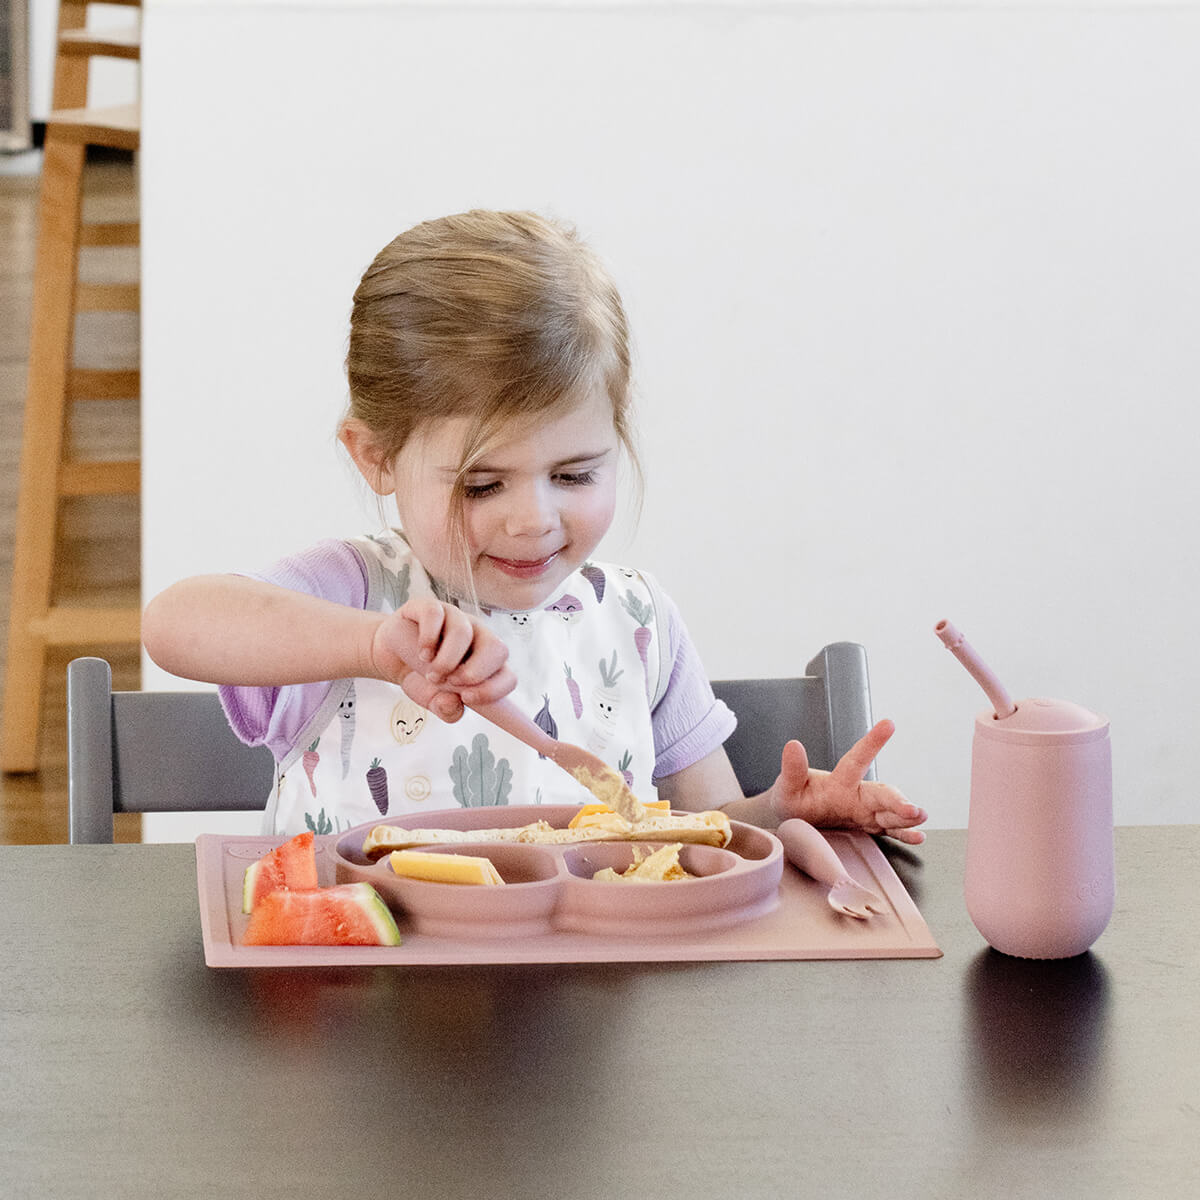 ezpz Happy Feeding Set in Blush / Silicone, Self-Suctioning Plate, Silicone Cup and Straw, Training Utensils for Toddlers